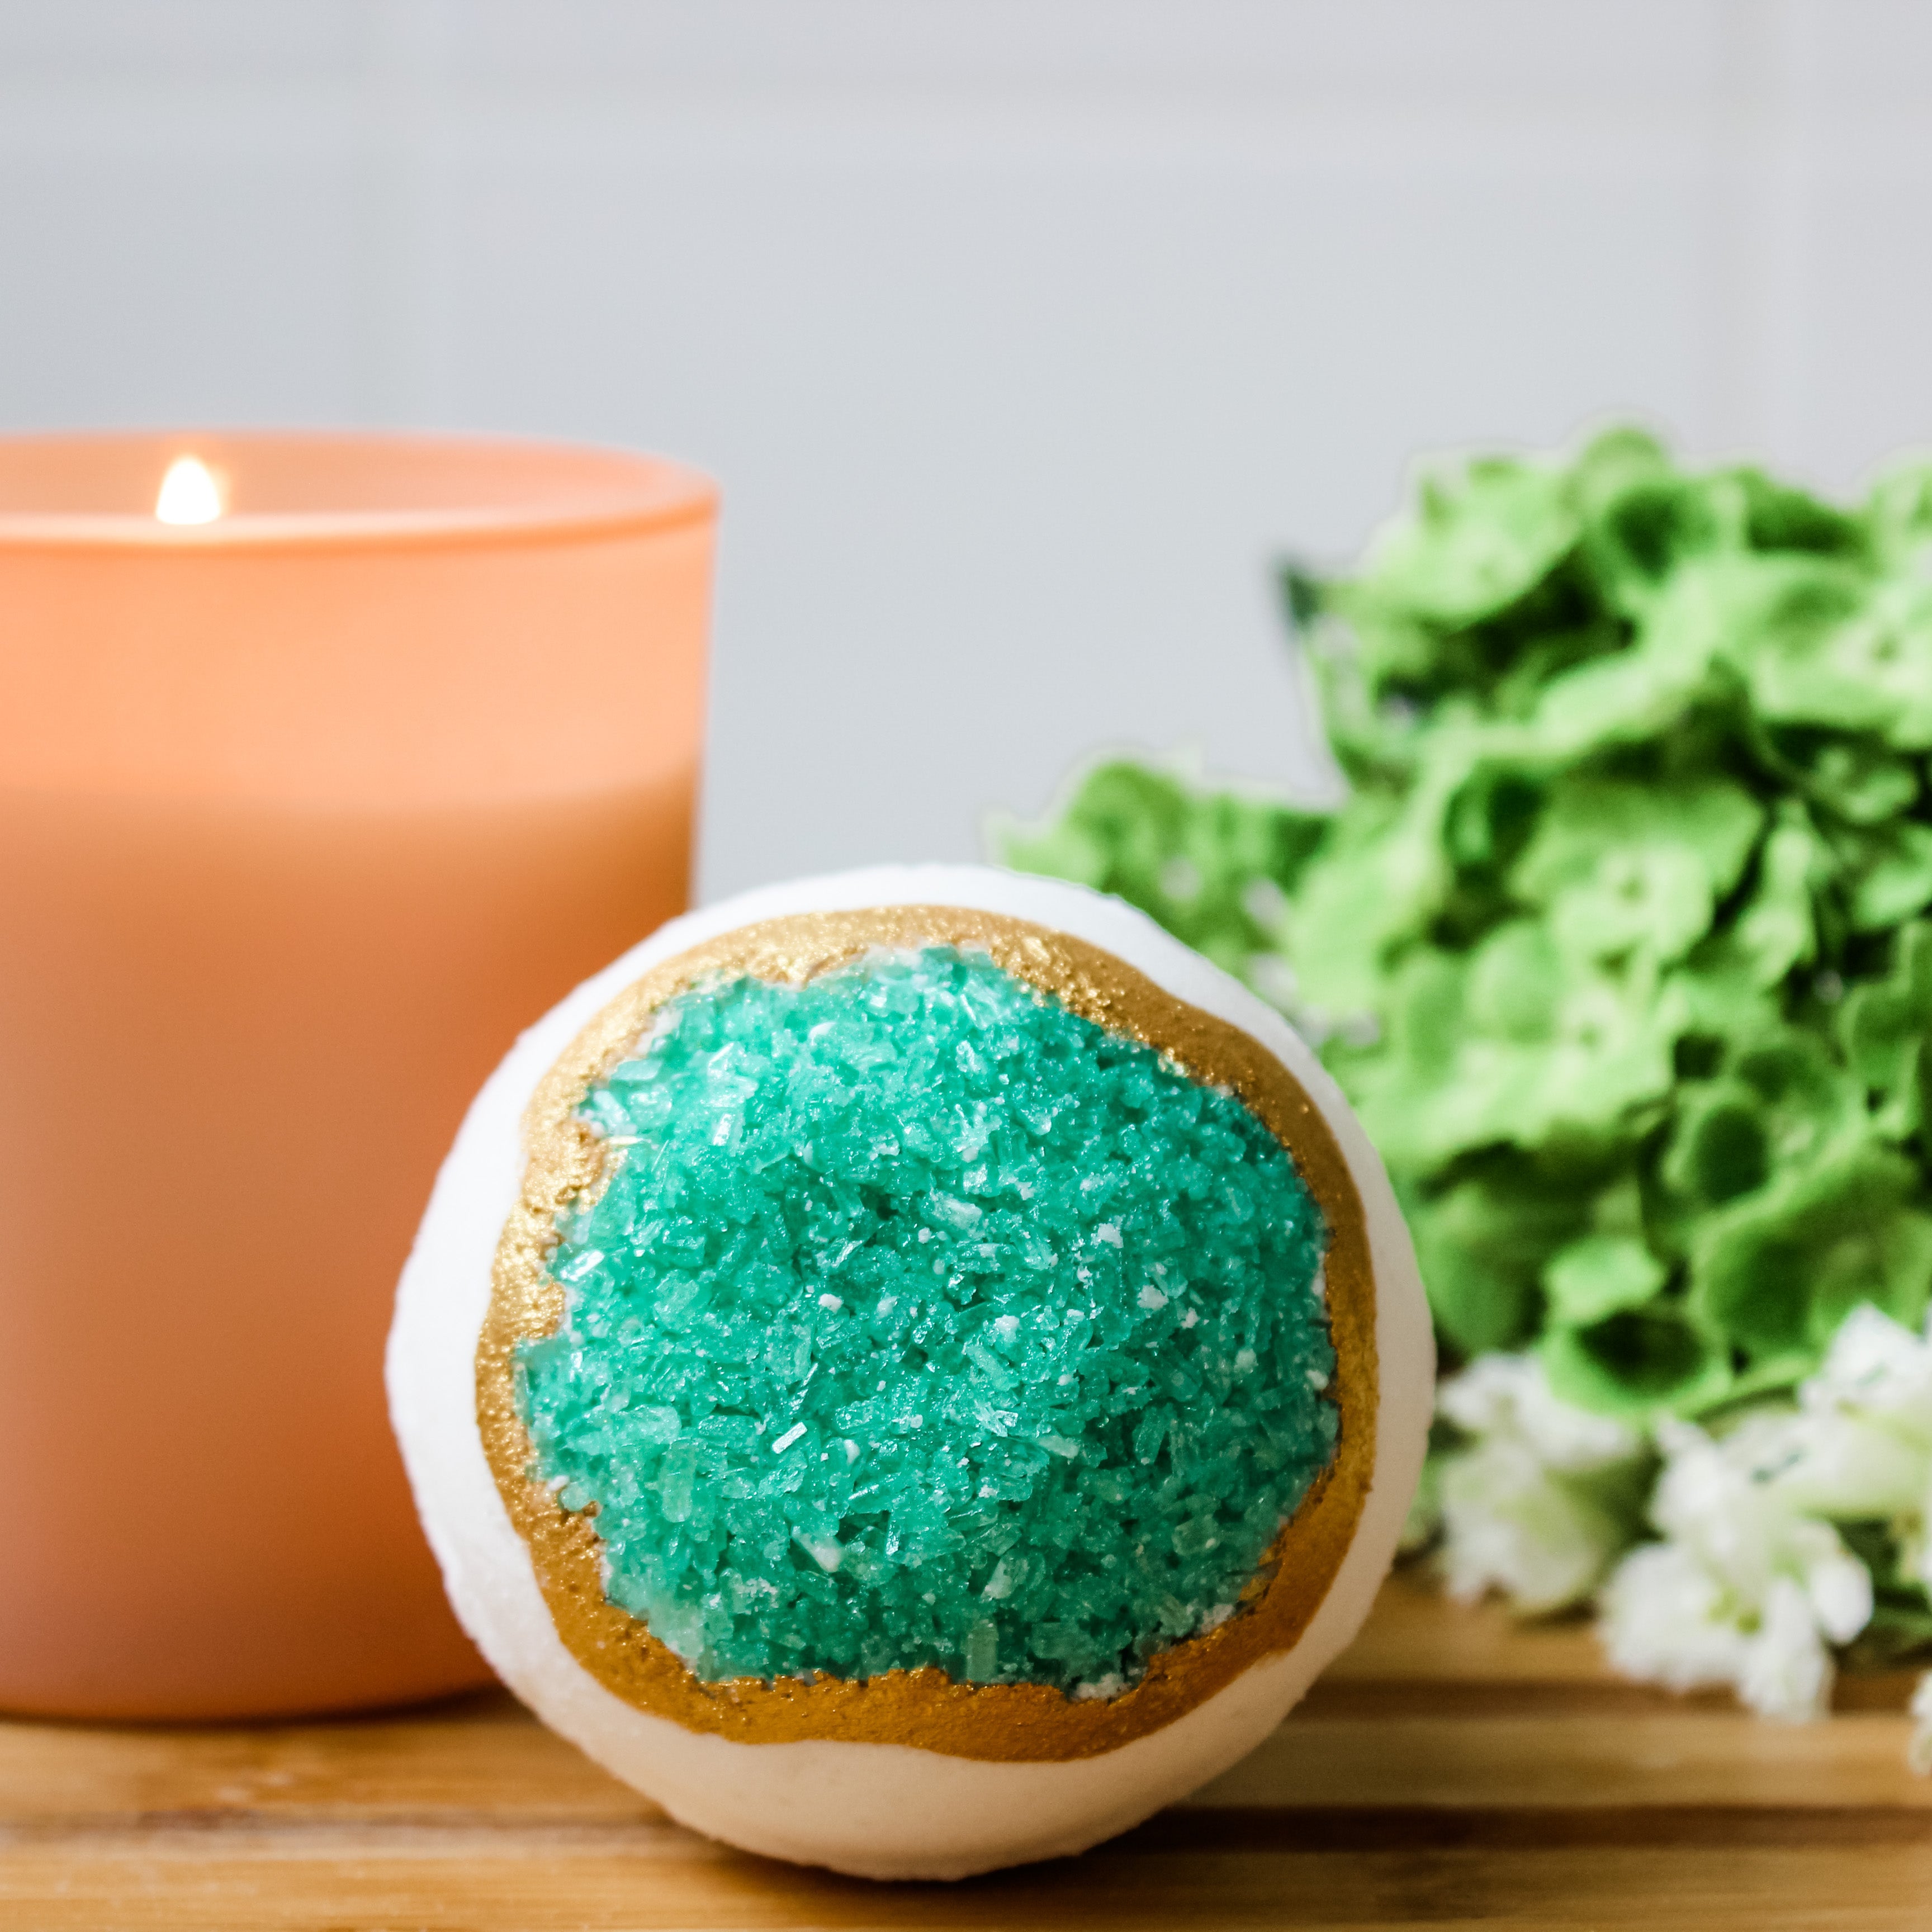 Emerald Empowerment Crystal Bath Bomb - Handmade with Natural Ingredients. Hidden Forest Naturals